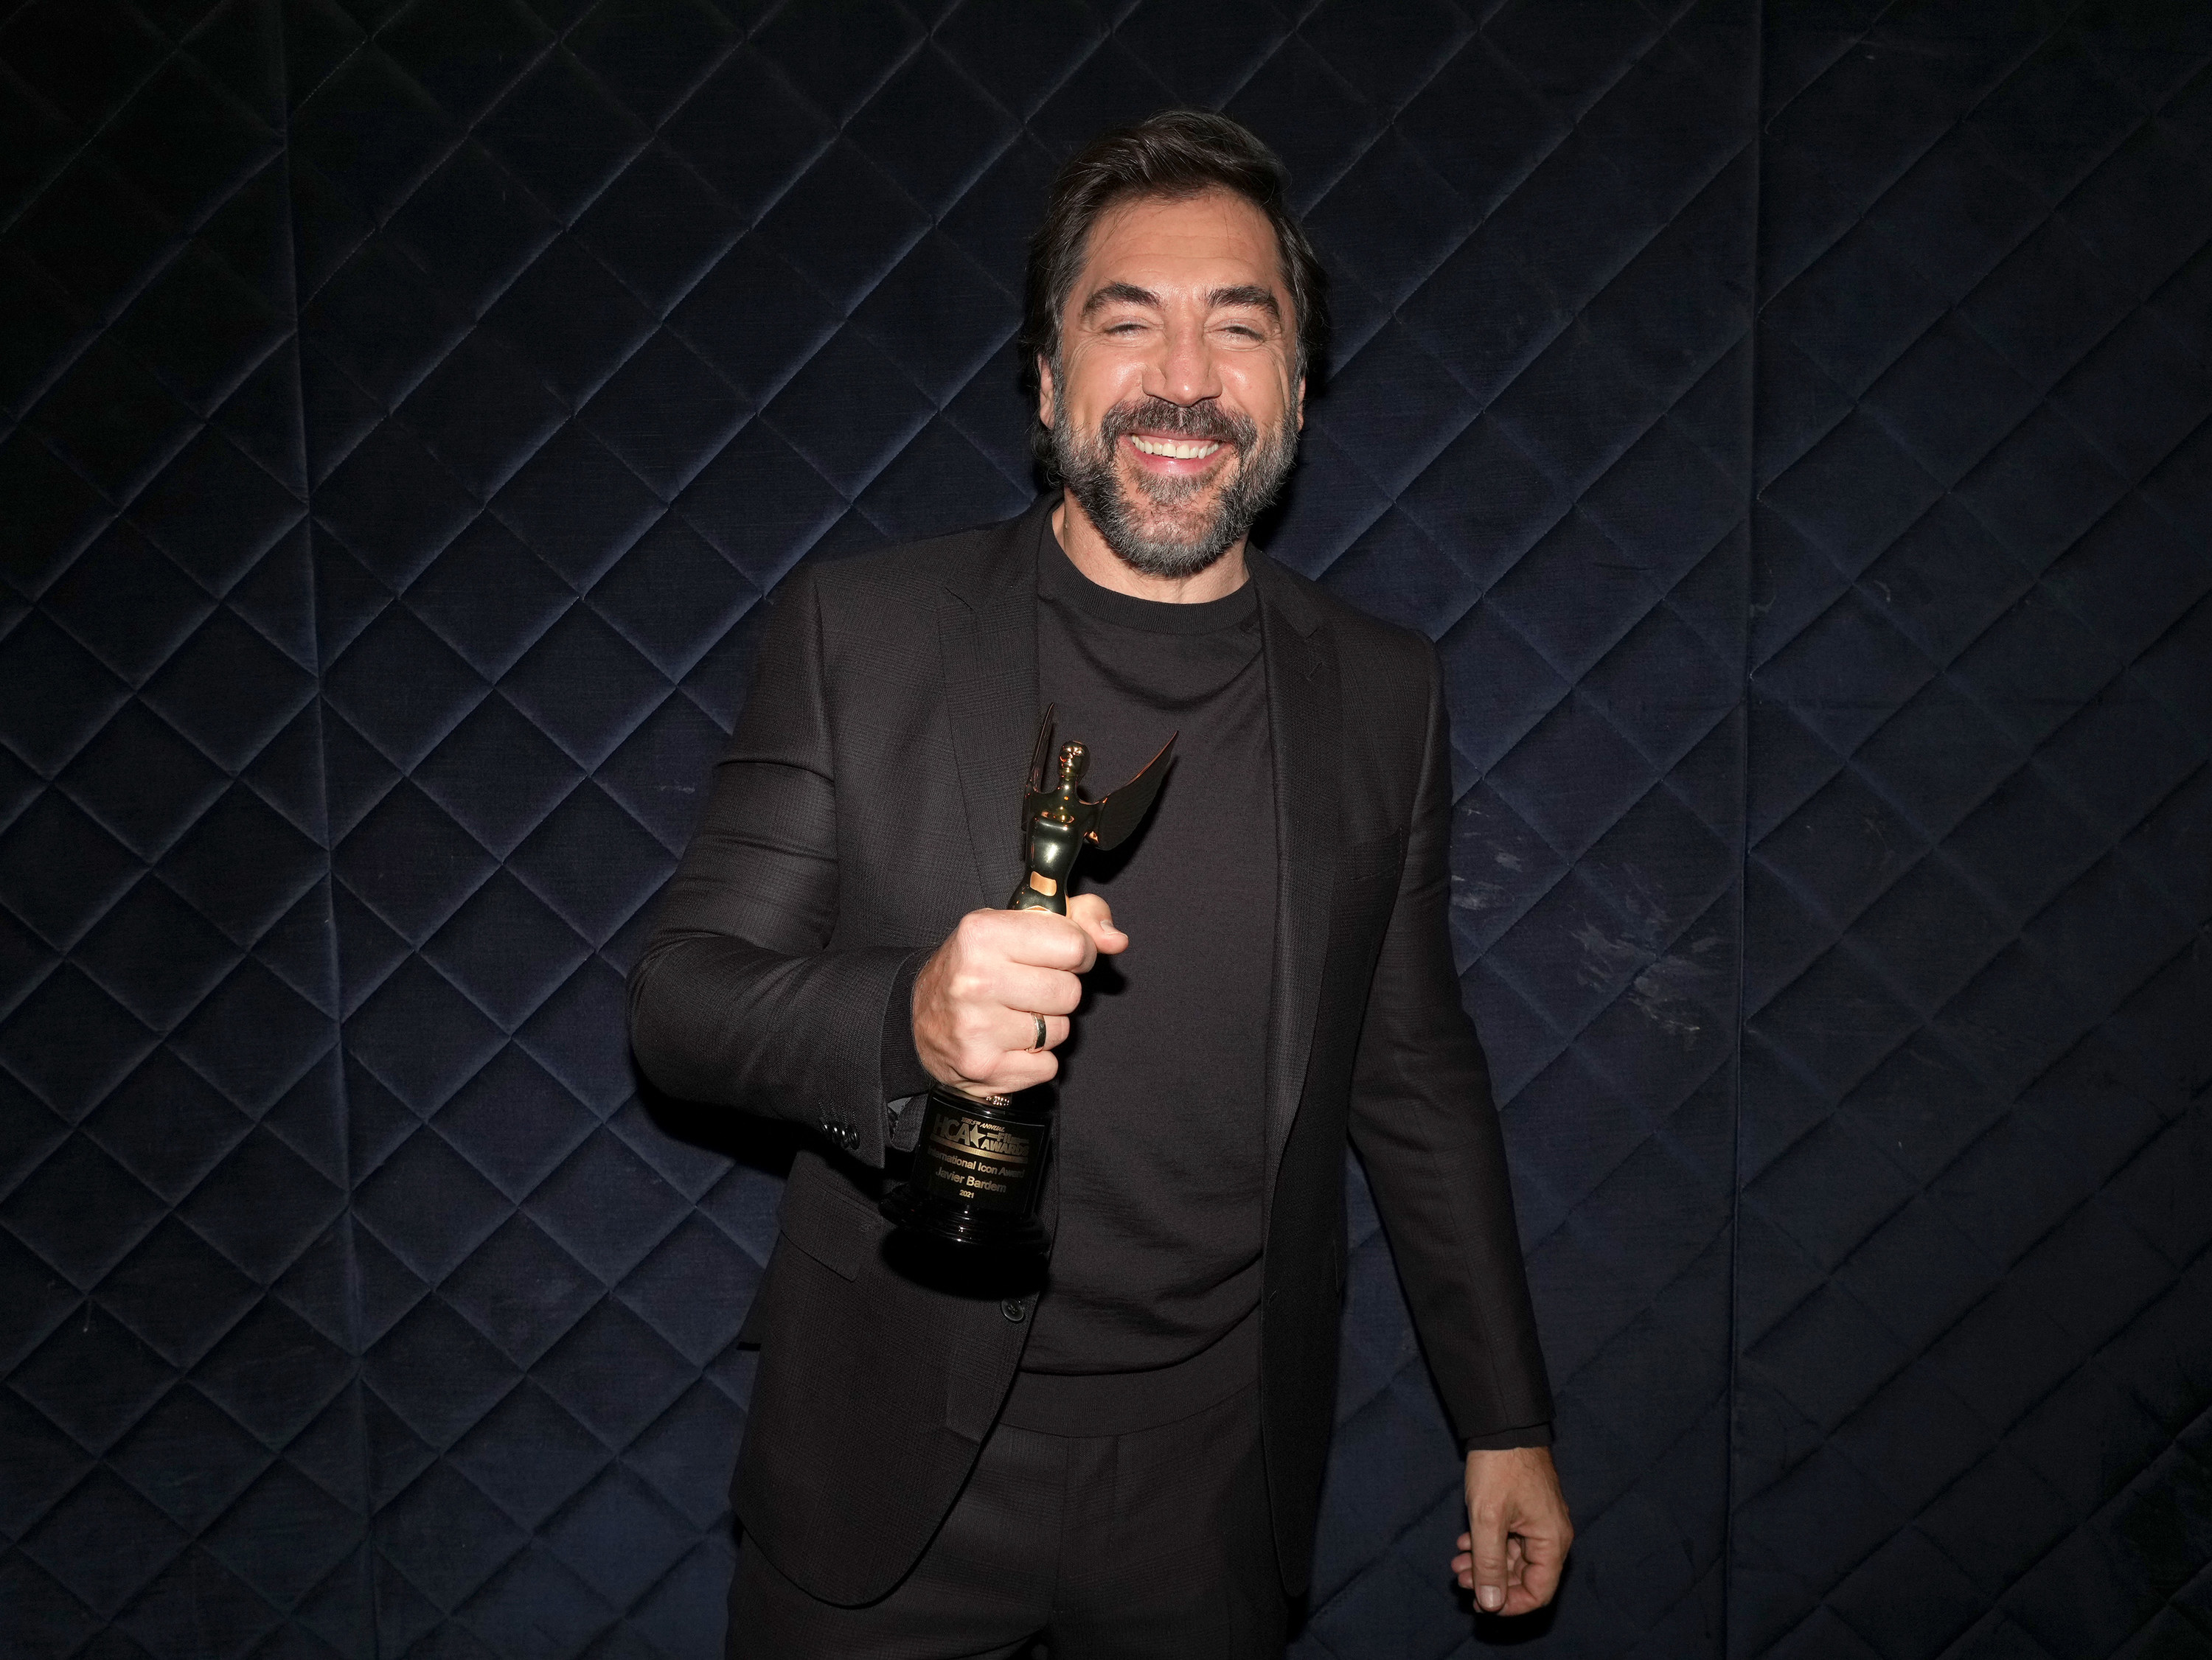 Javier holds a statue backstage